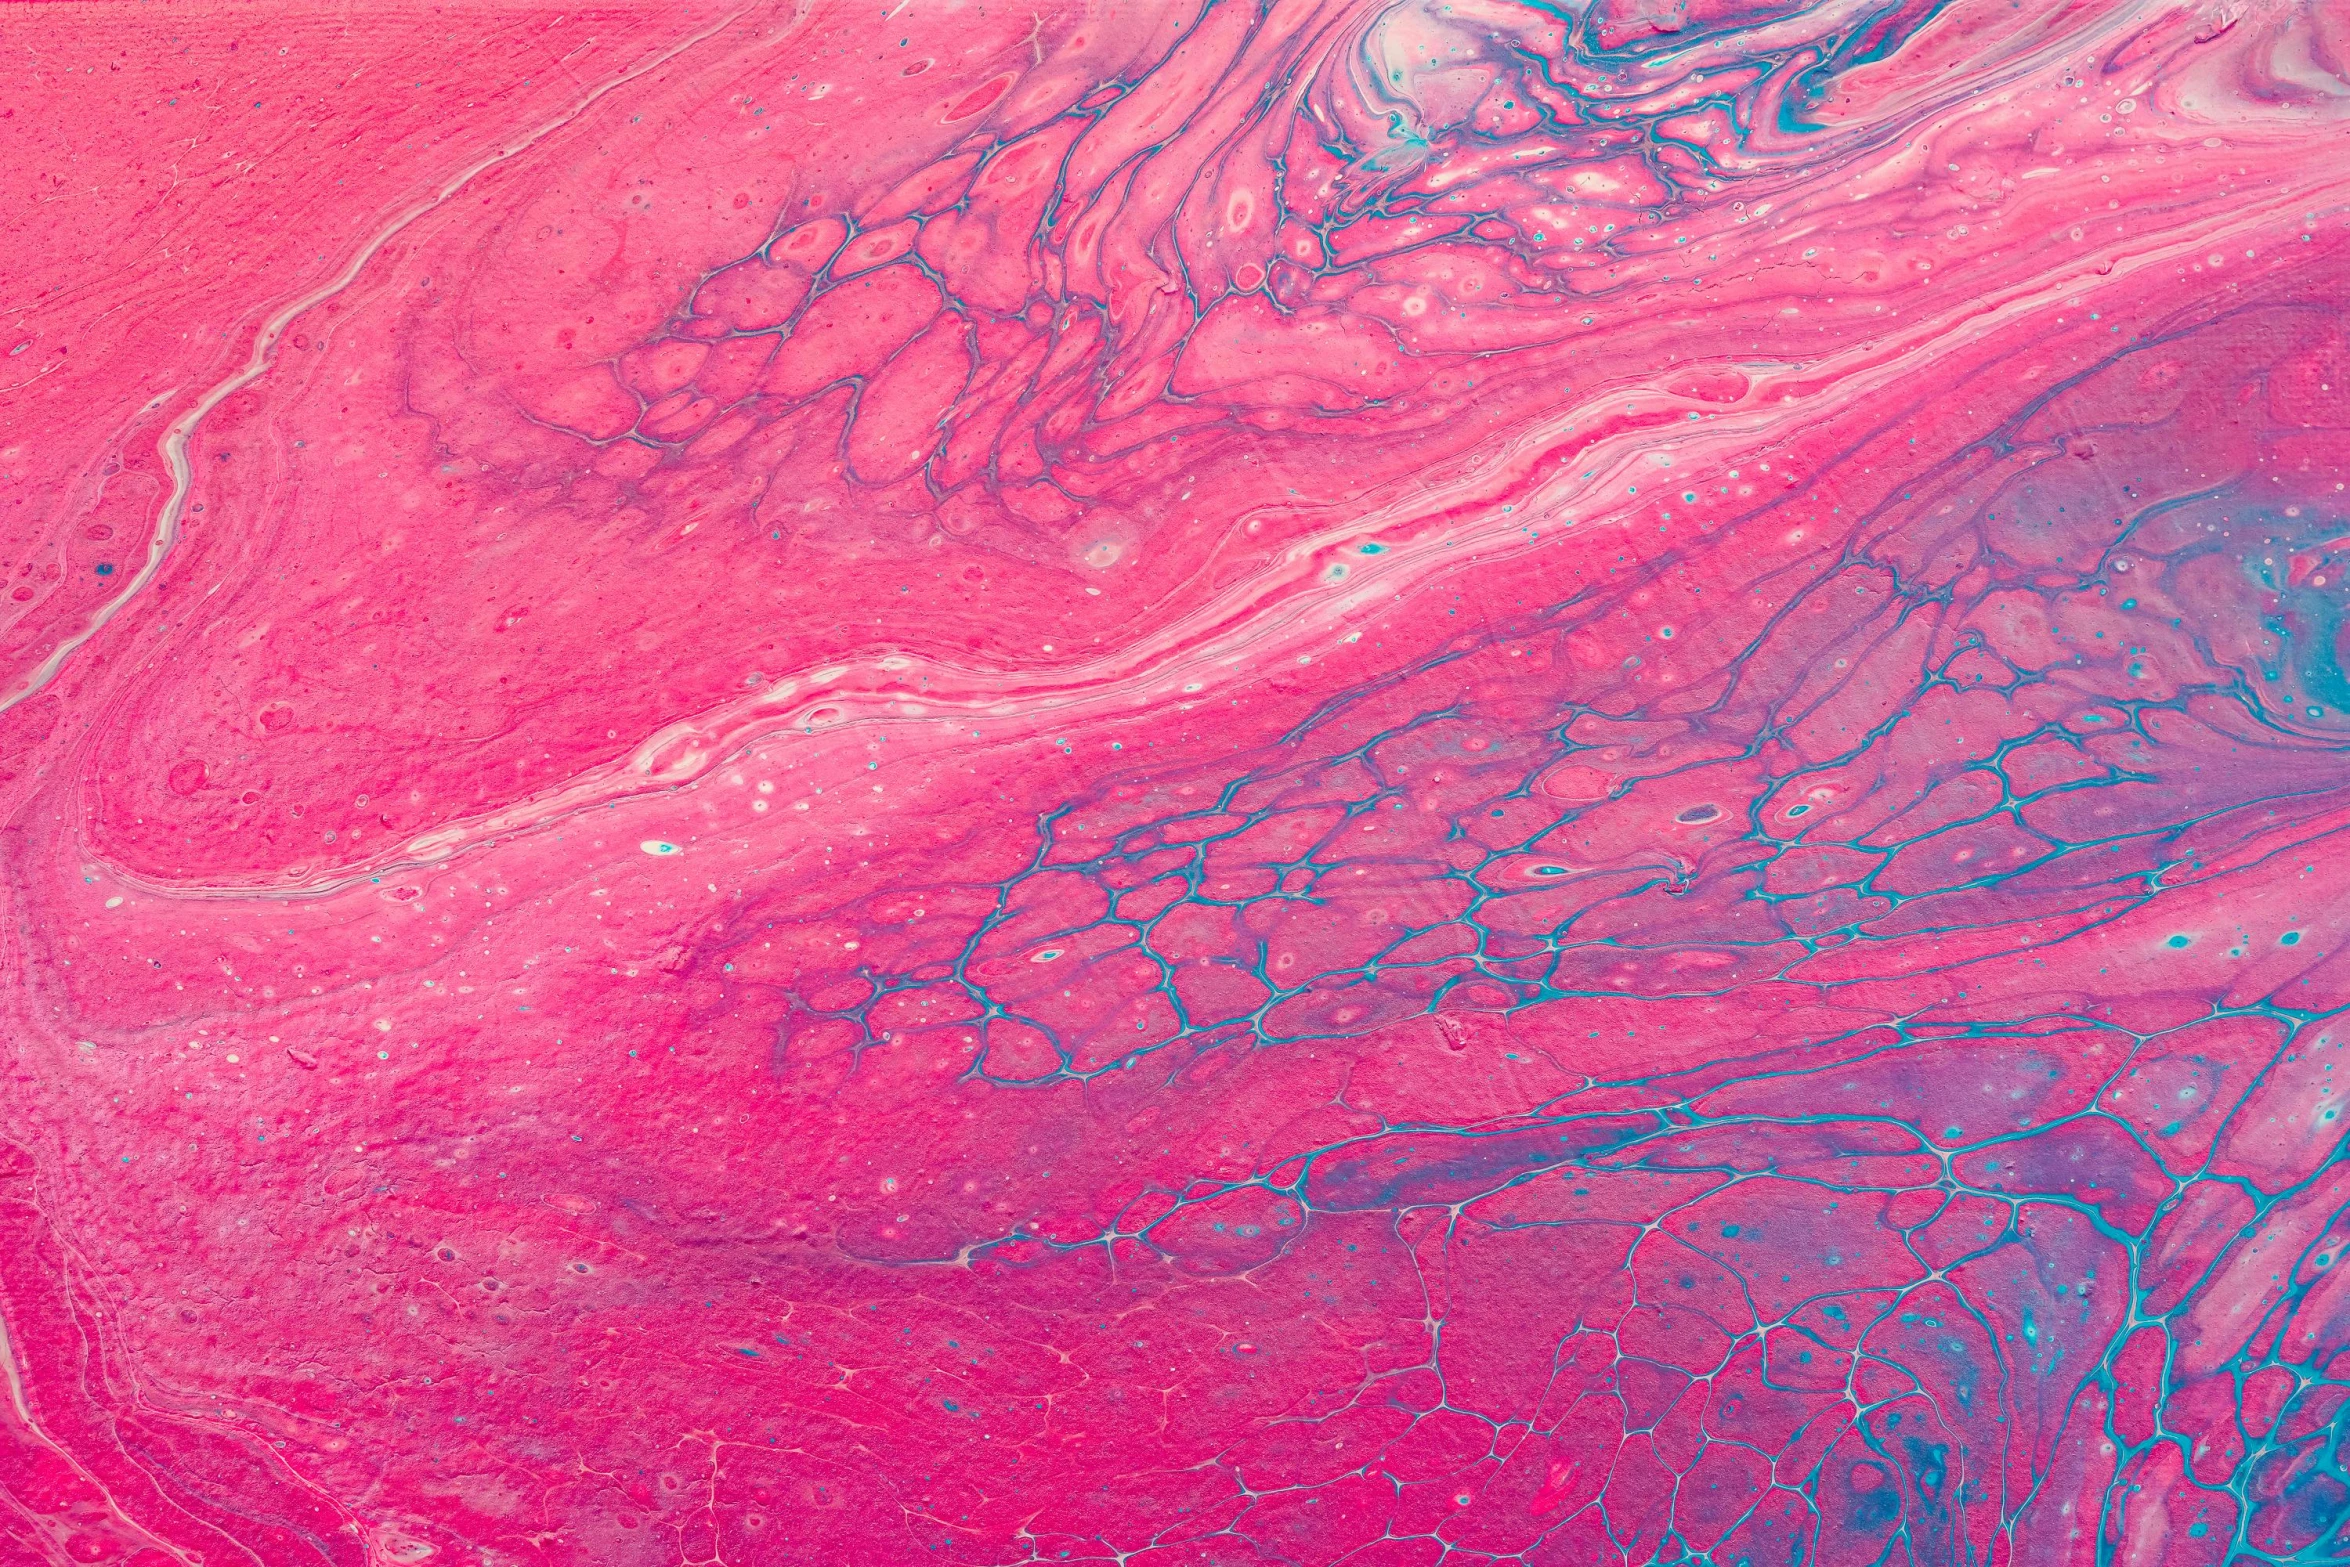 a close up of a pink and blue fluid painting, an album cover, flickr, pink slime everywhere, aerial iridecent veins, aleksander rostov, lush